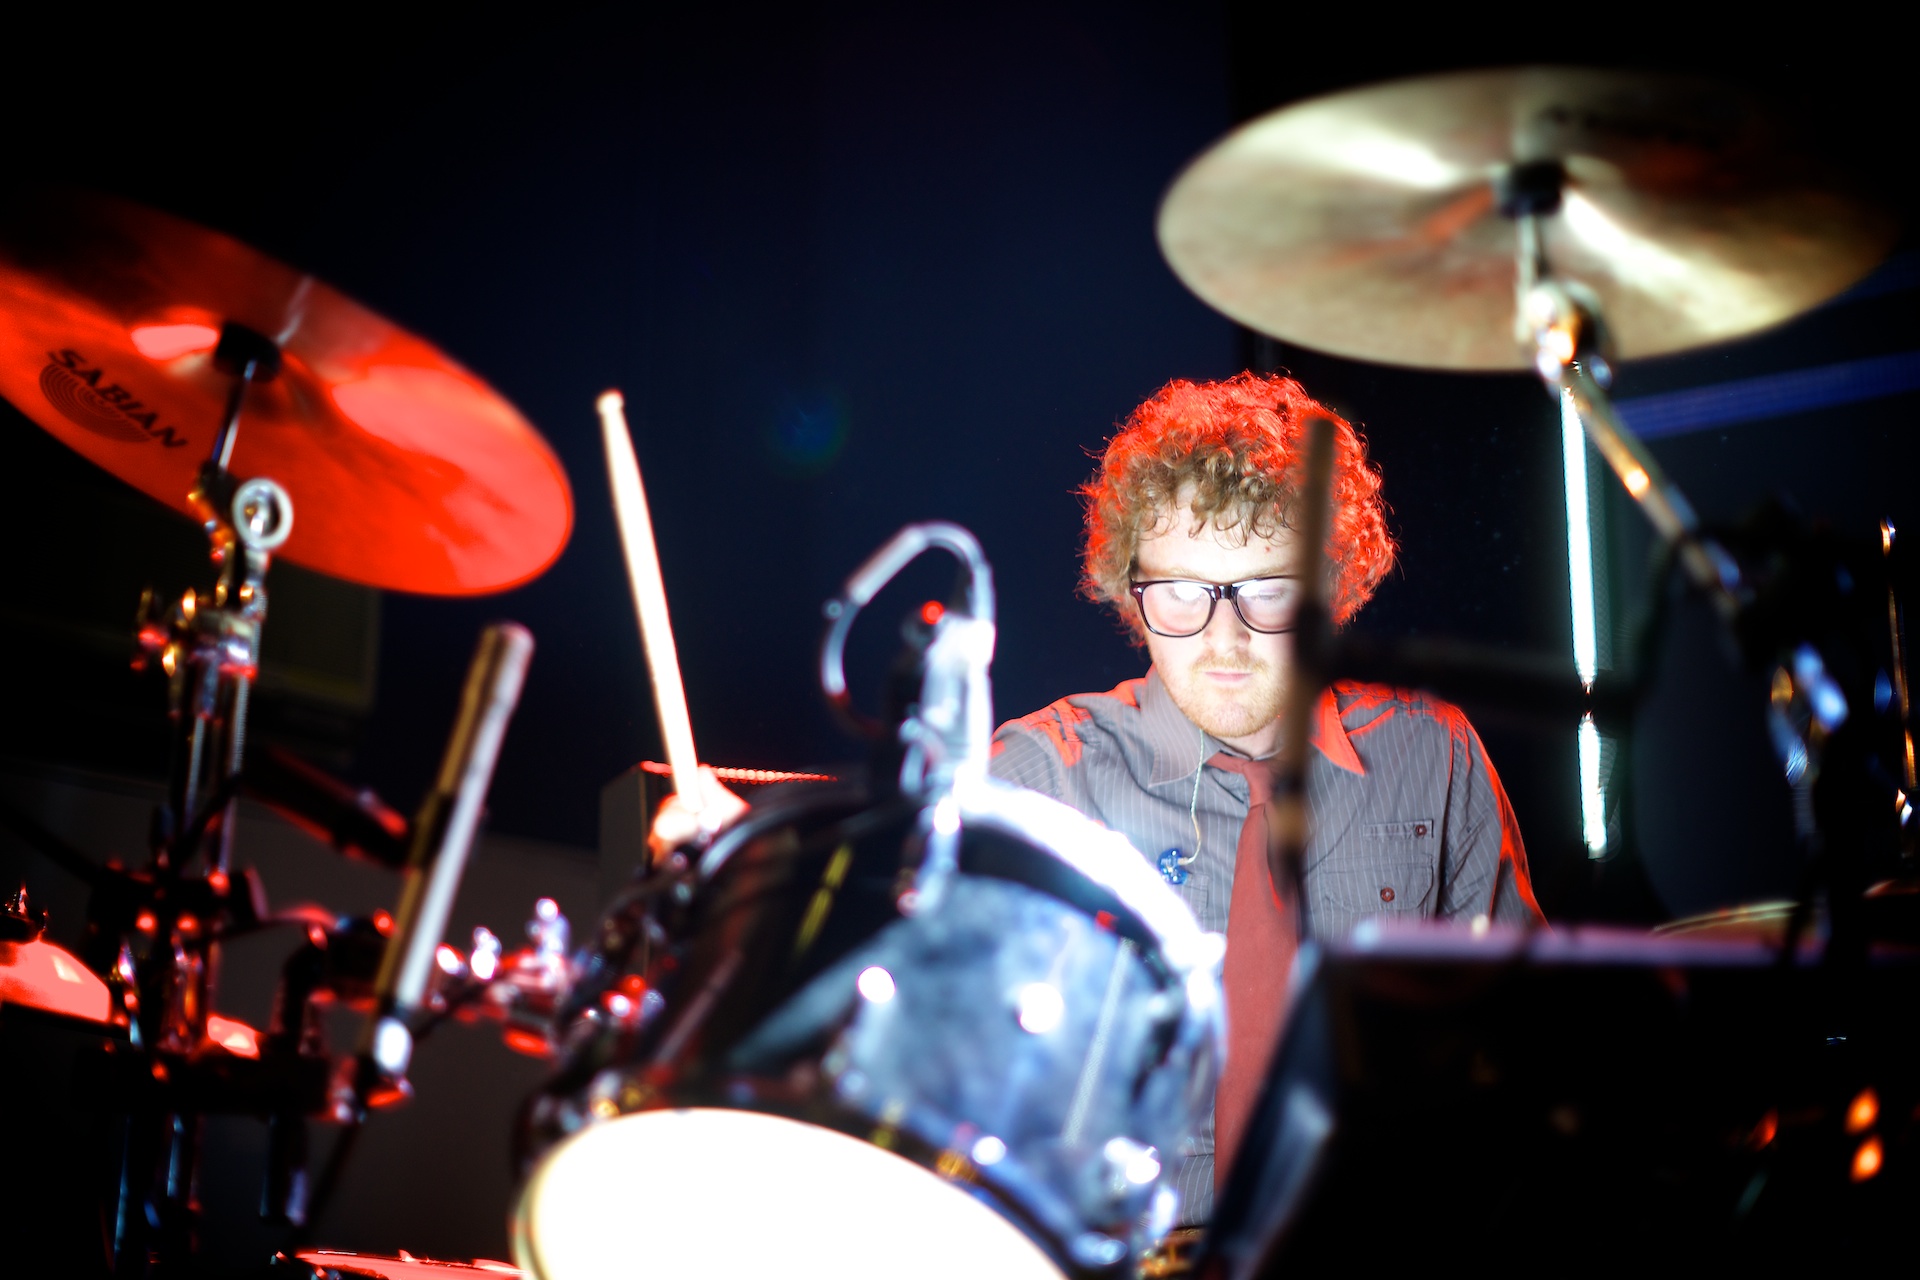 a man wearing eye glasses and a vest playing drums